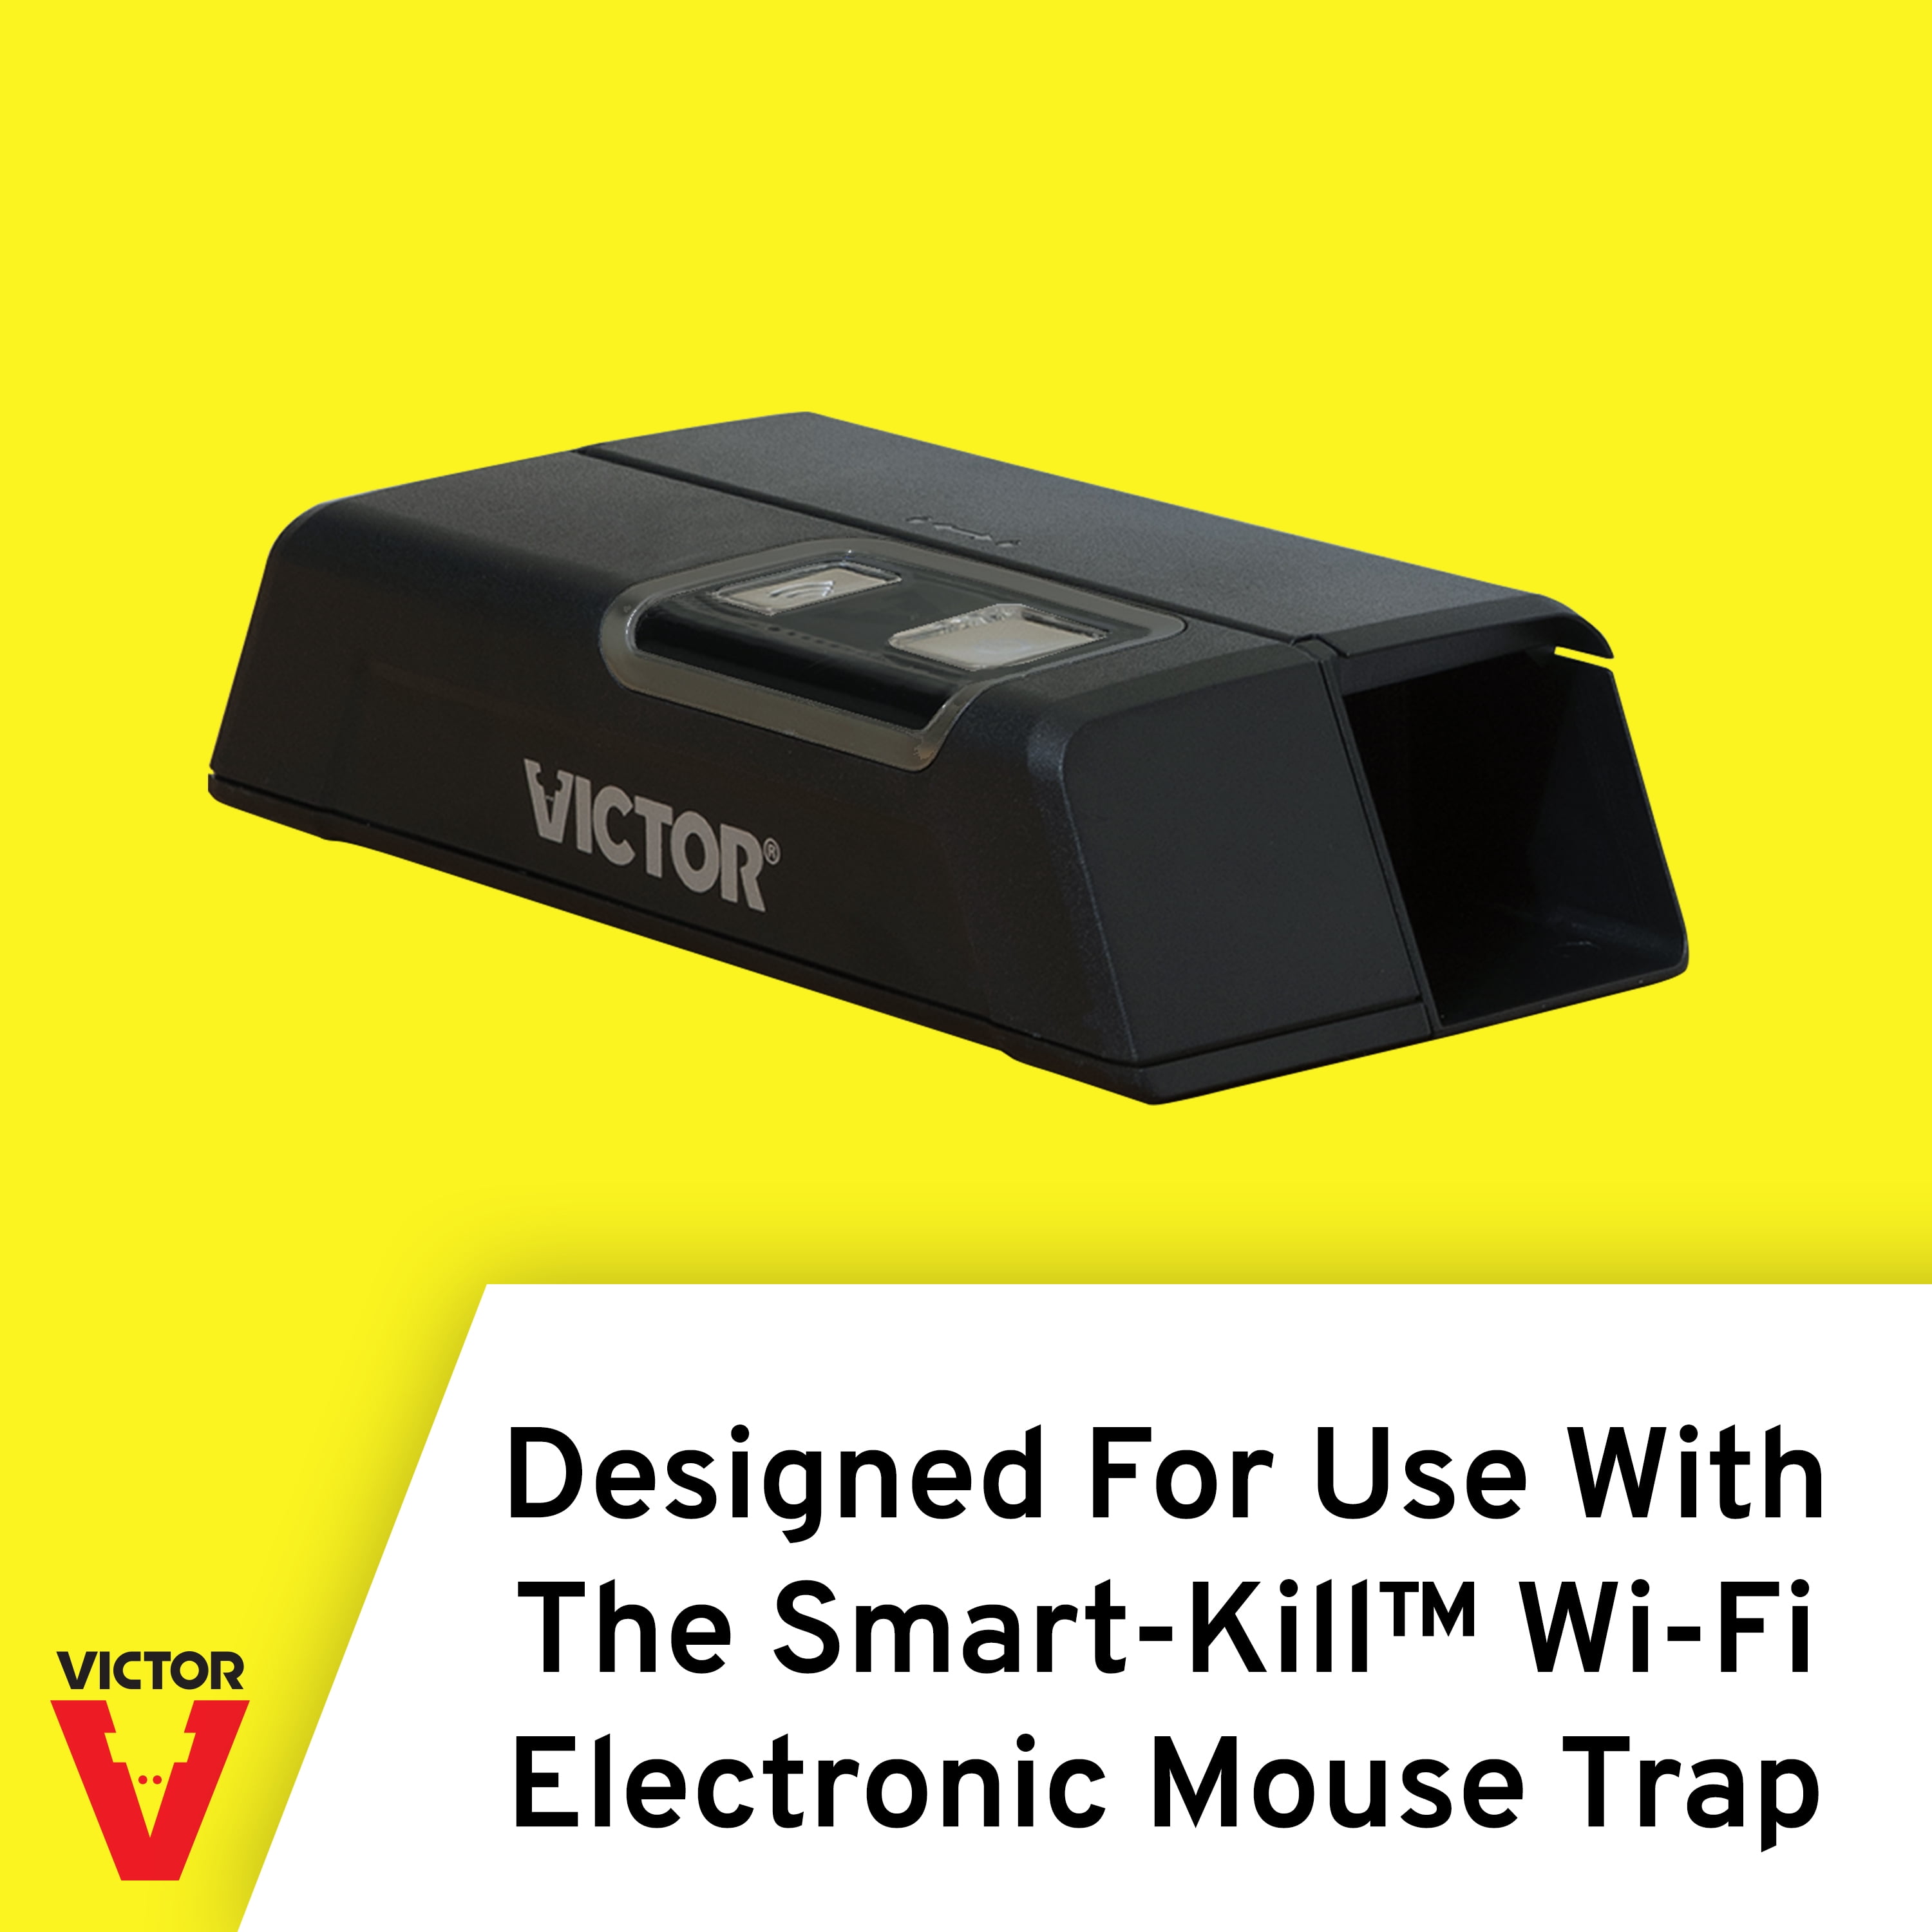 How to Connect the Smart-Kill Wi-Fi Electronic Mouse Trap 